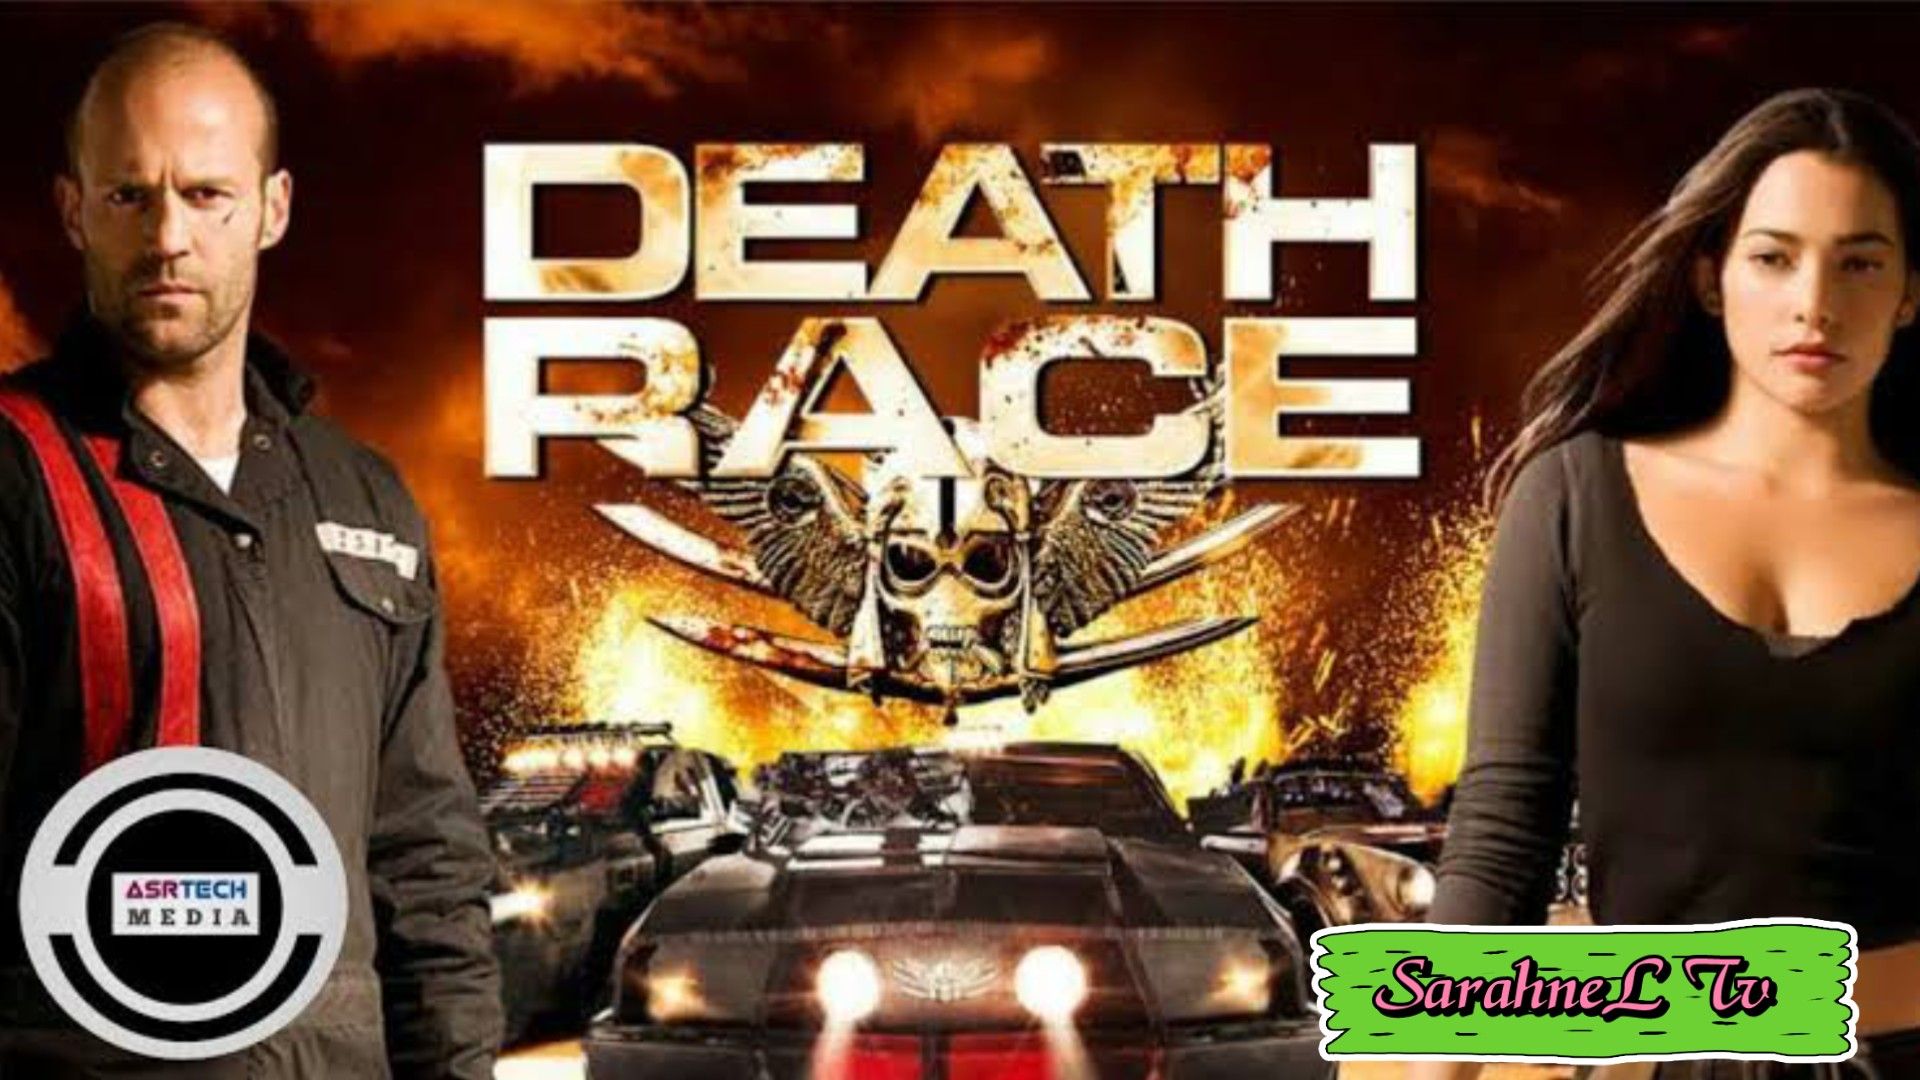 Best of Death race 2 full move